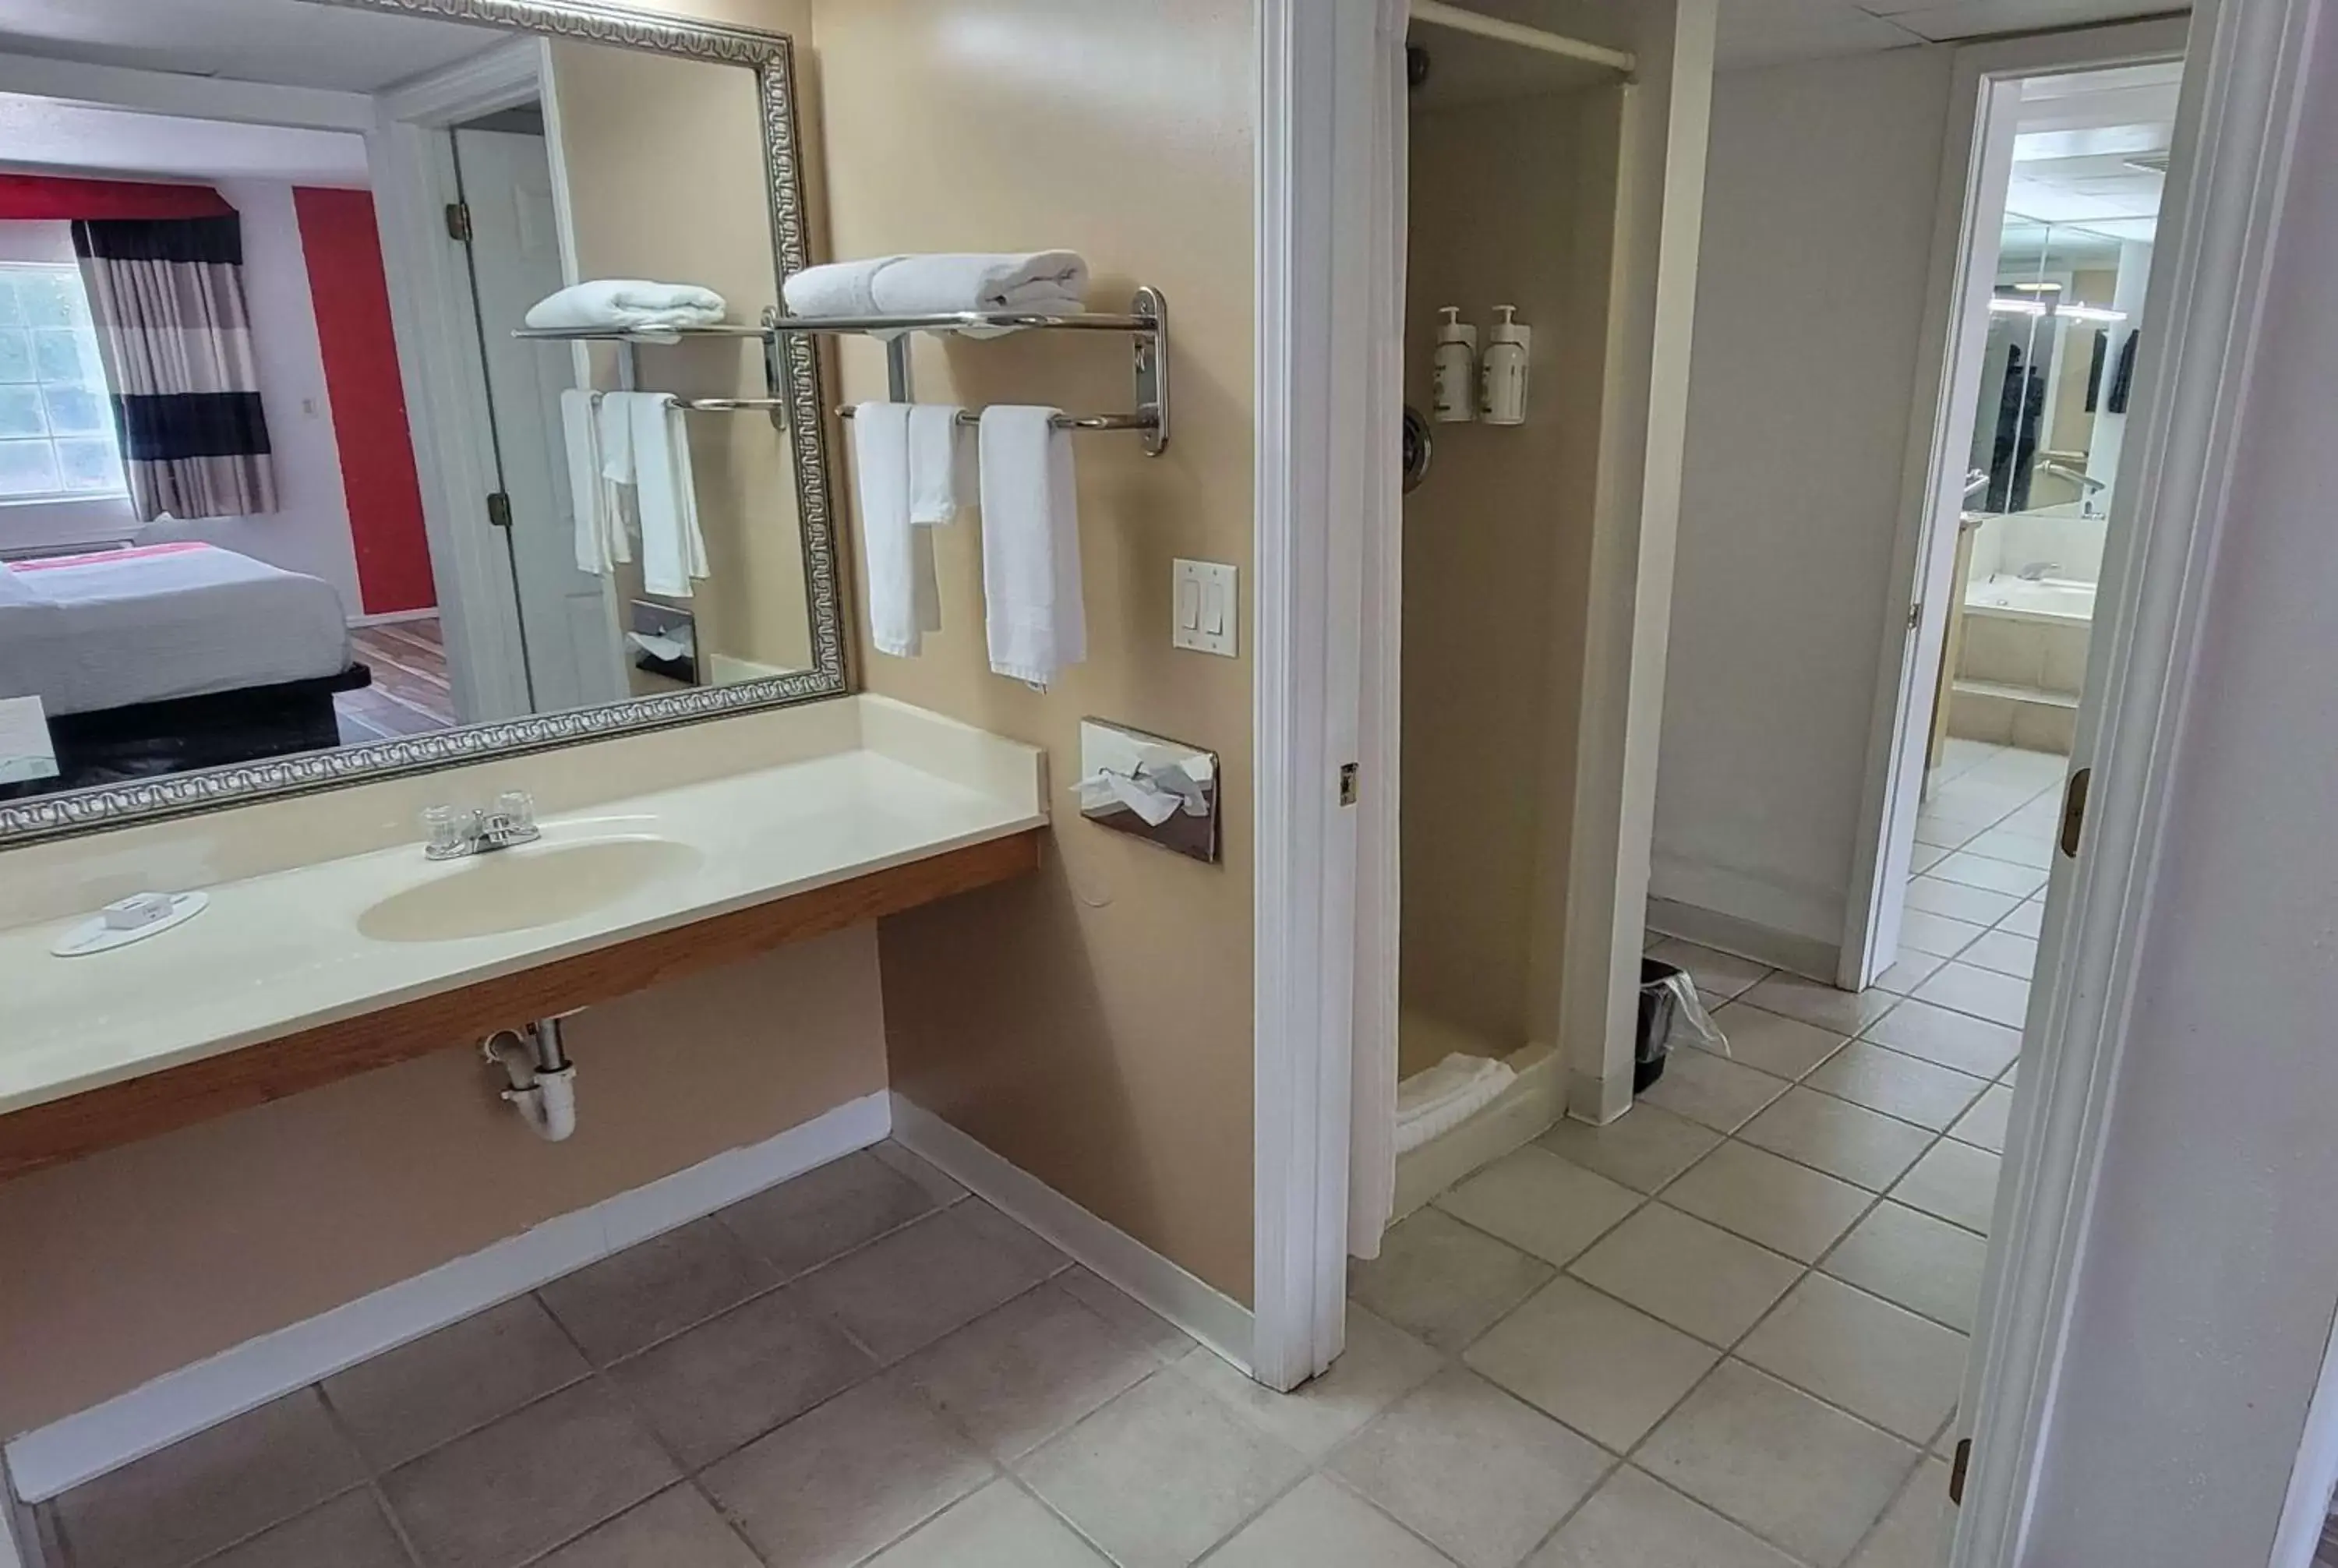 TV and multimedia, Bathroom in Ramada by Wyndham Mountain Home